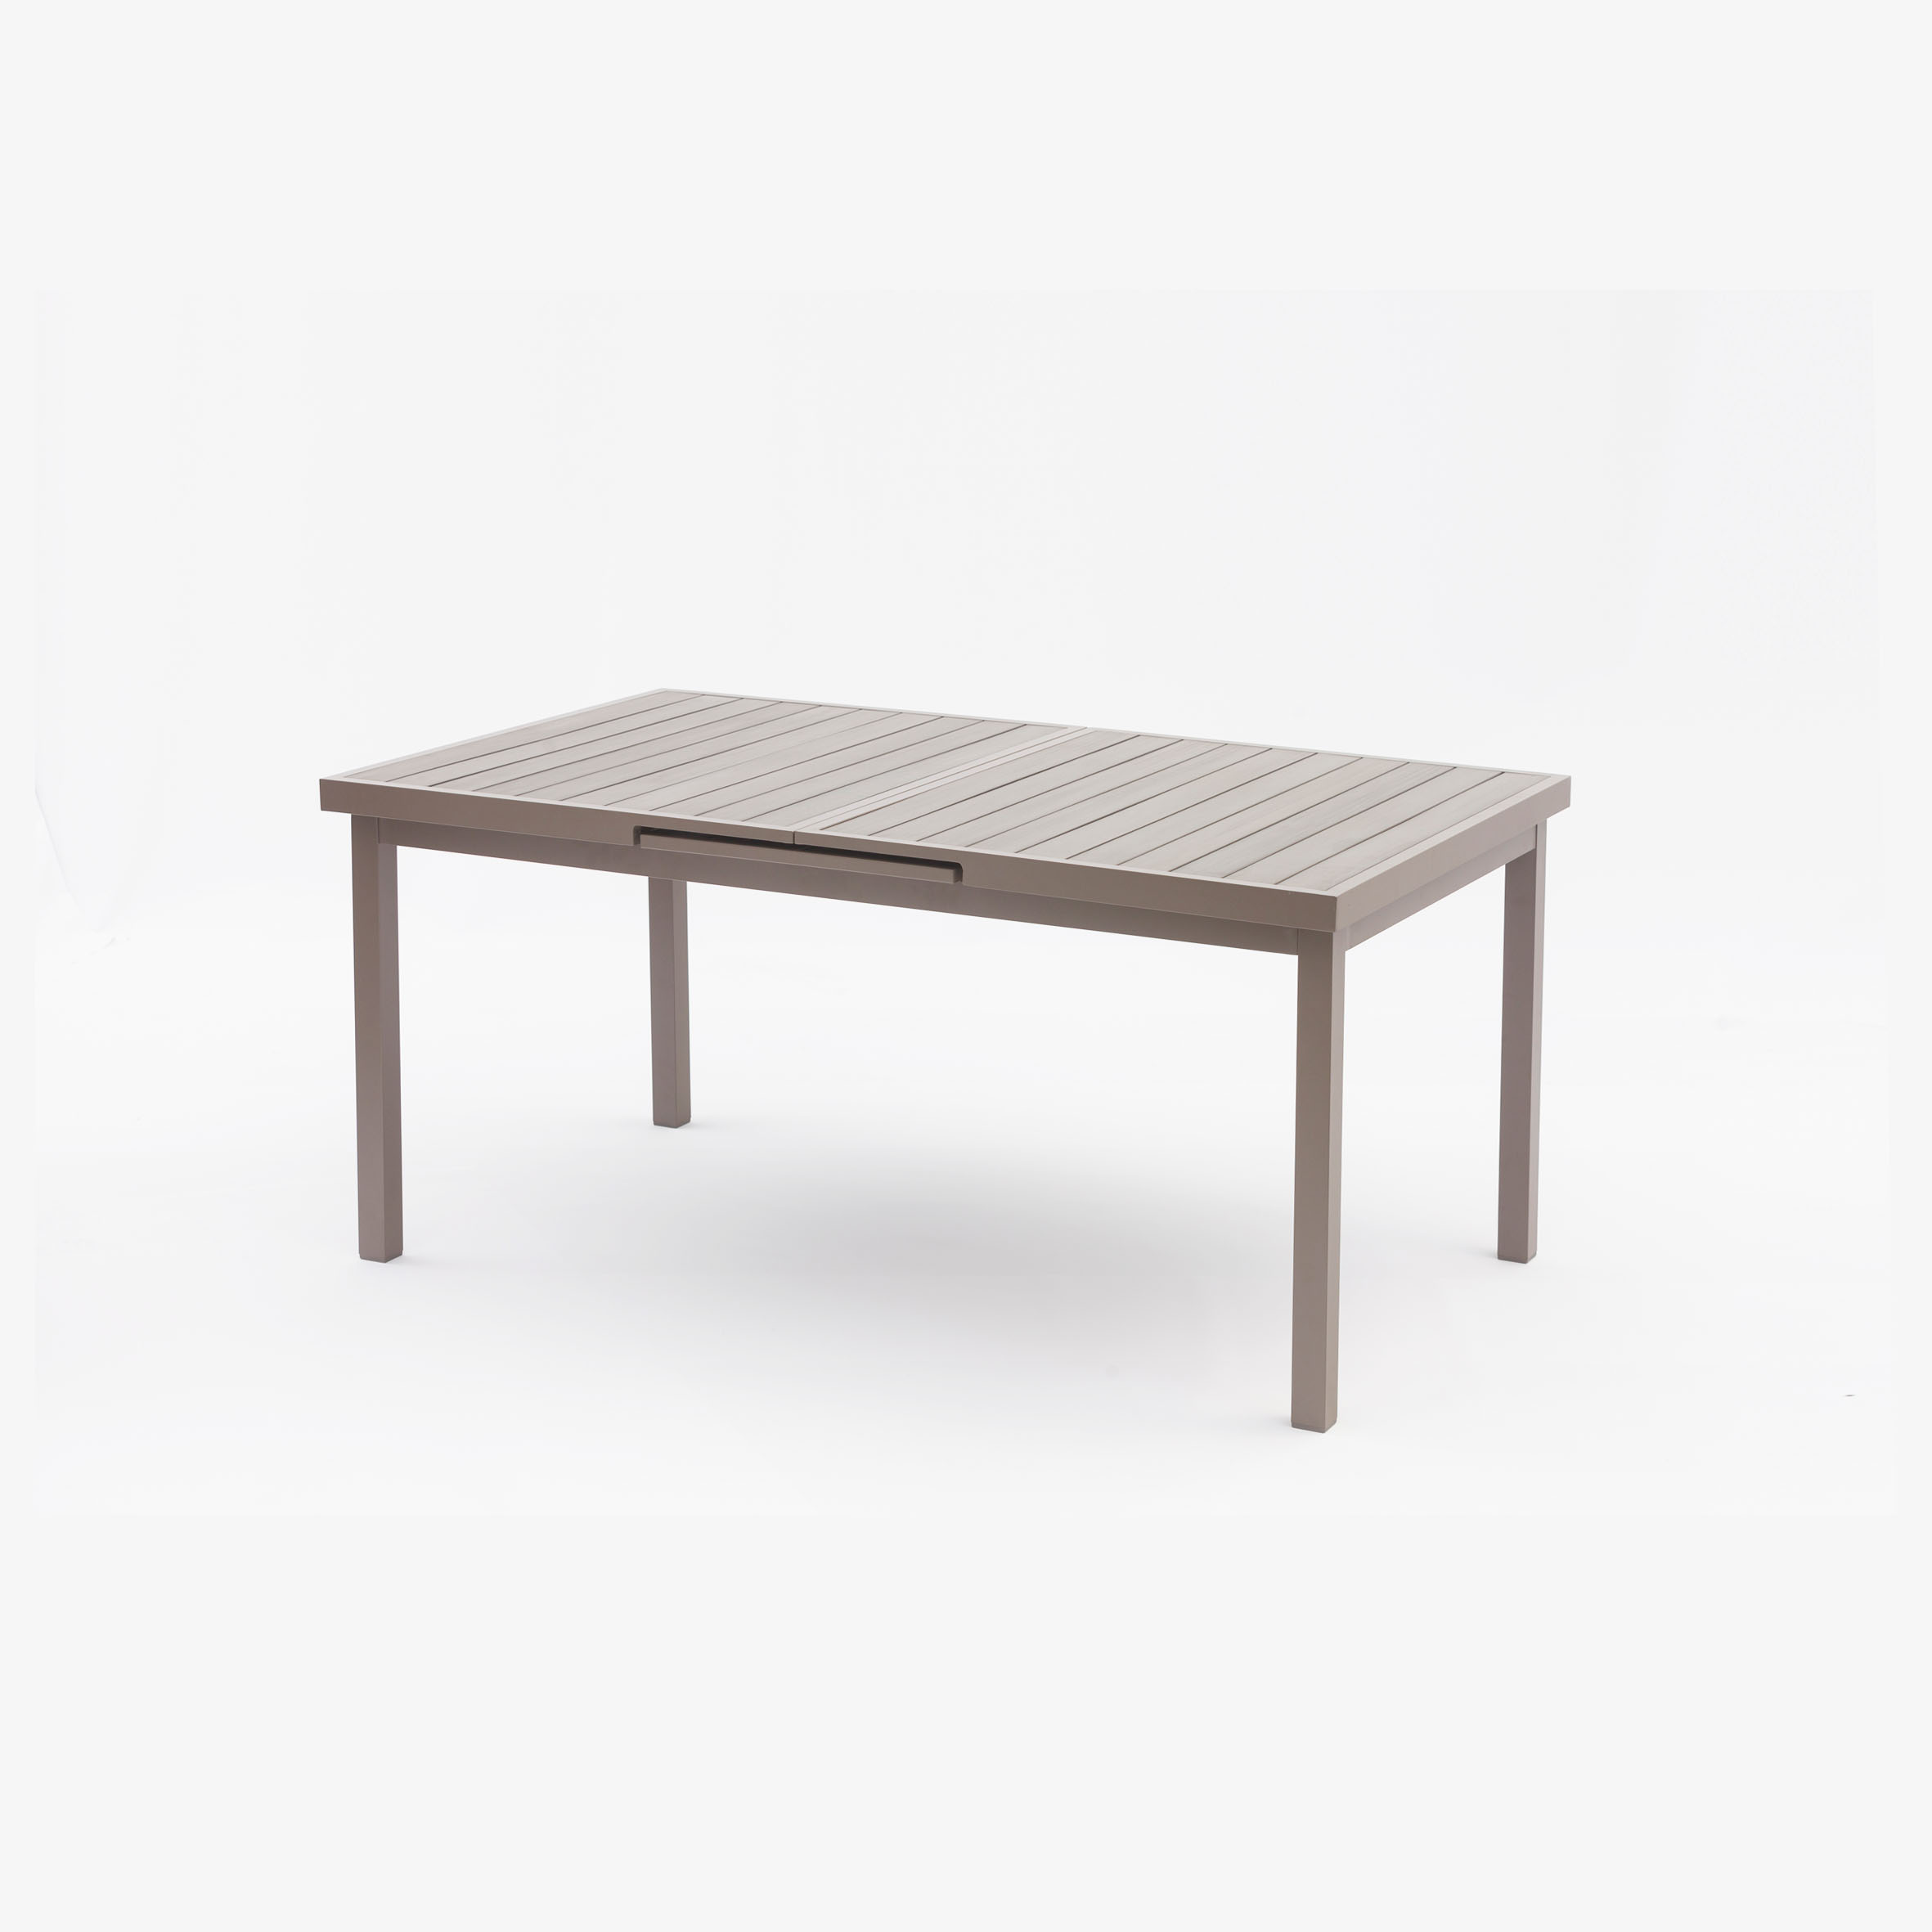 Vienna extension table (poly-wood top)S11